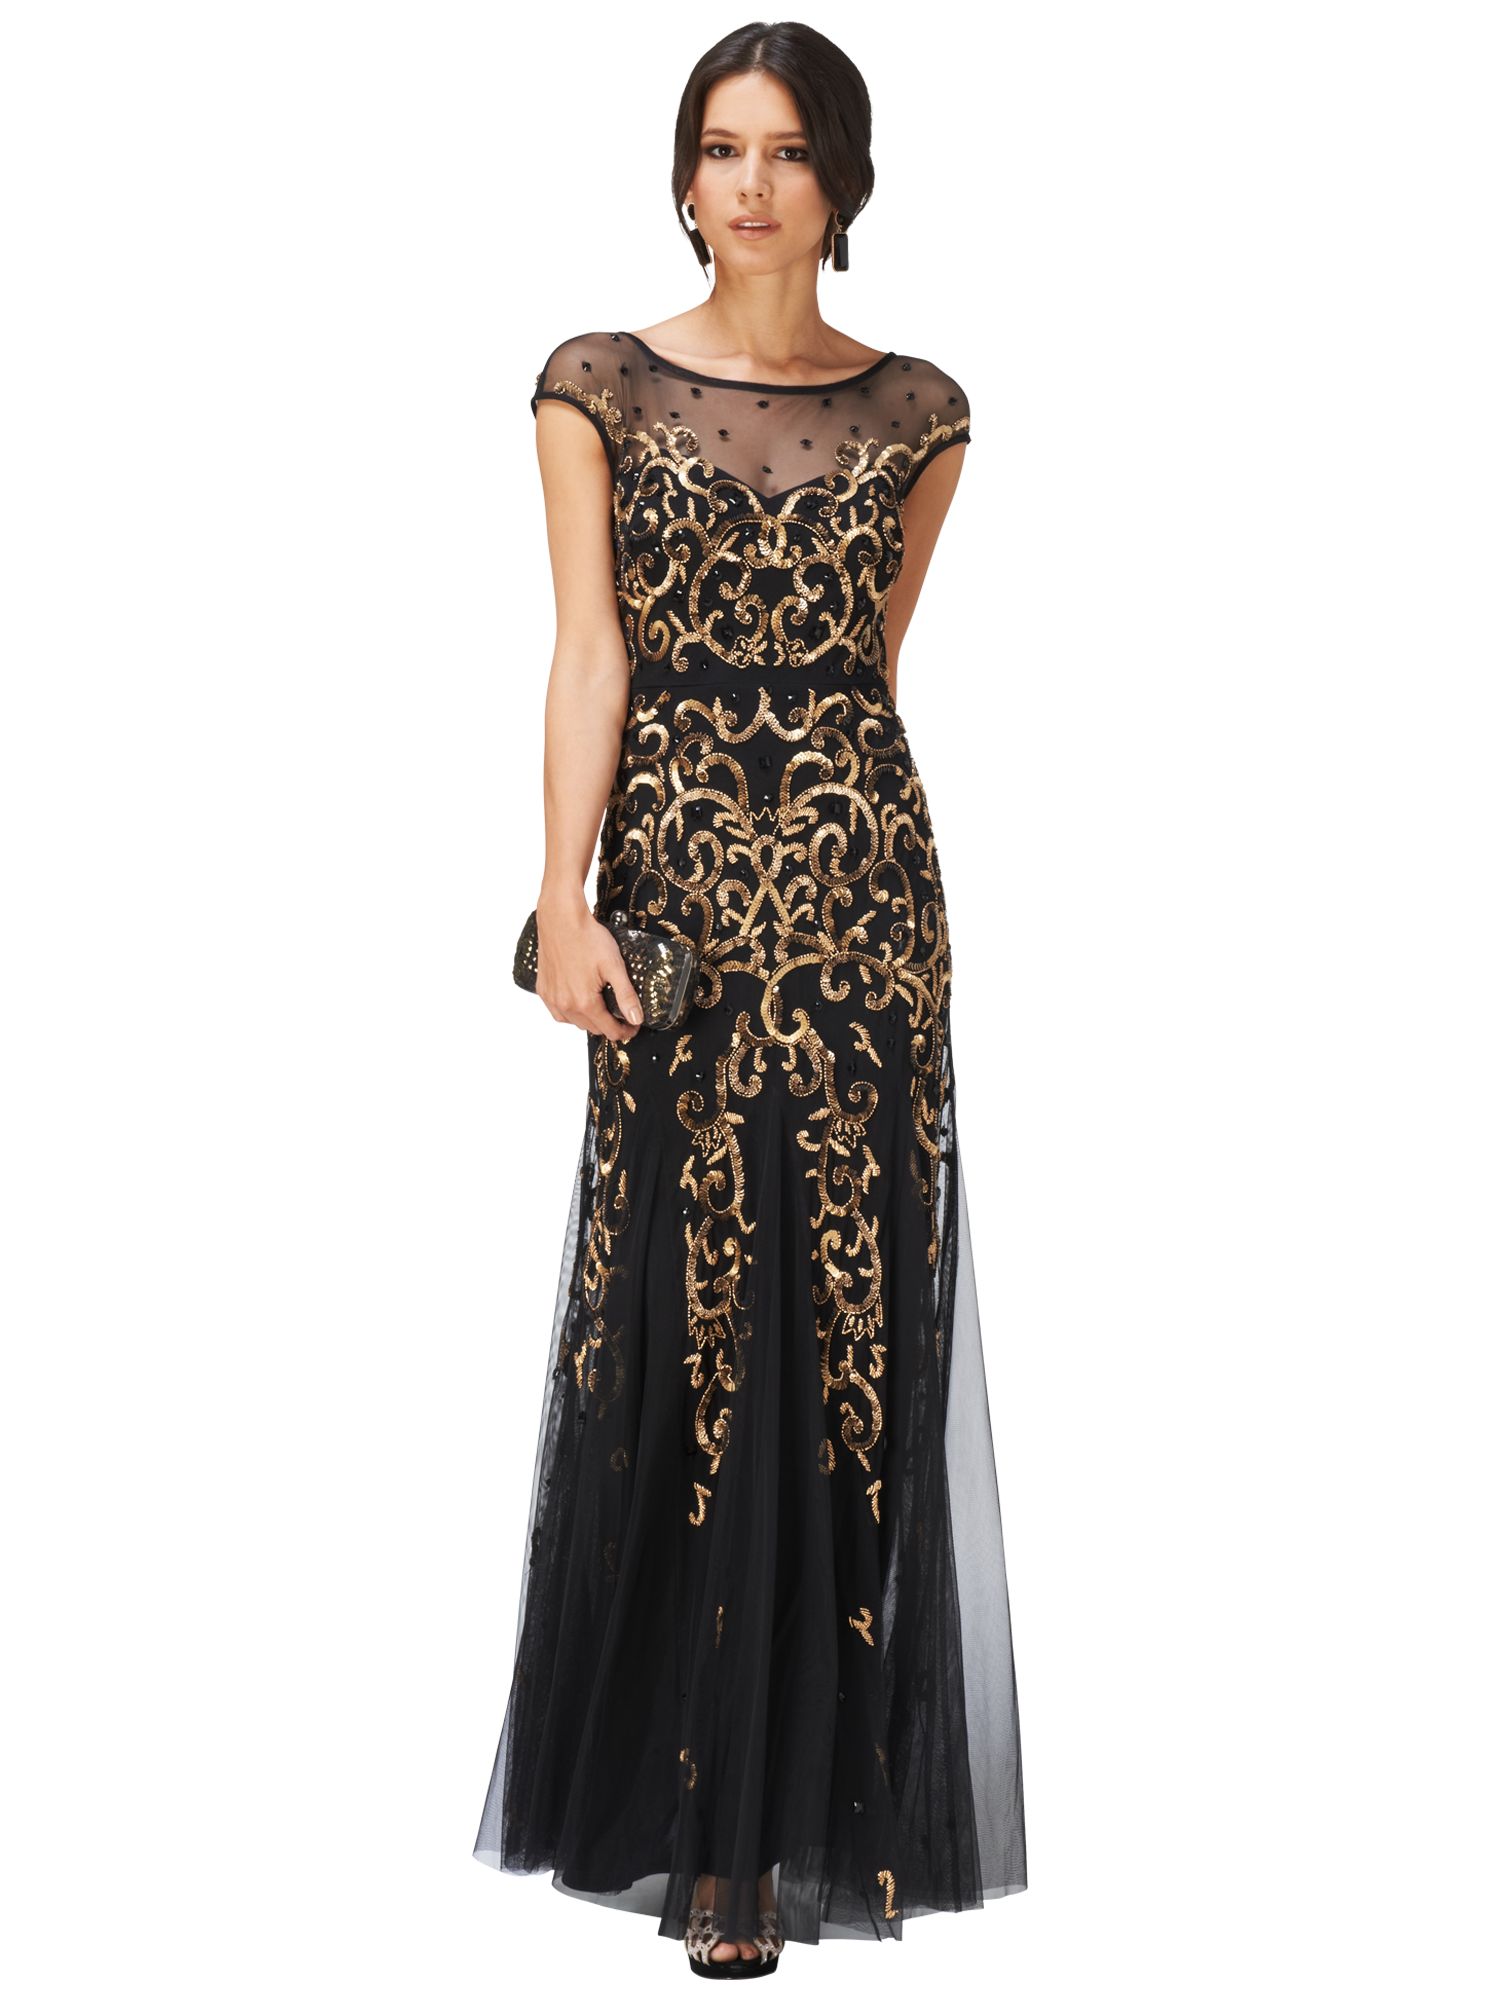 Phase Eight Collection 8 Nina Embellished Maxi Dress, Black/Gold at ...